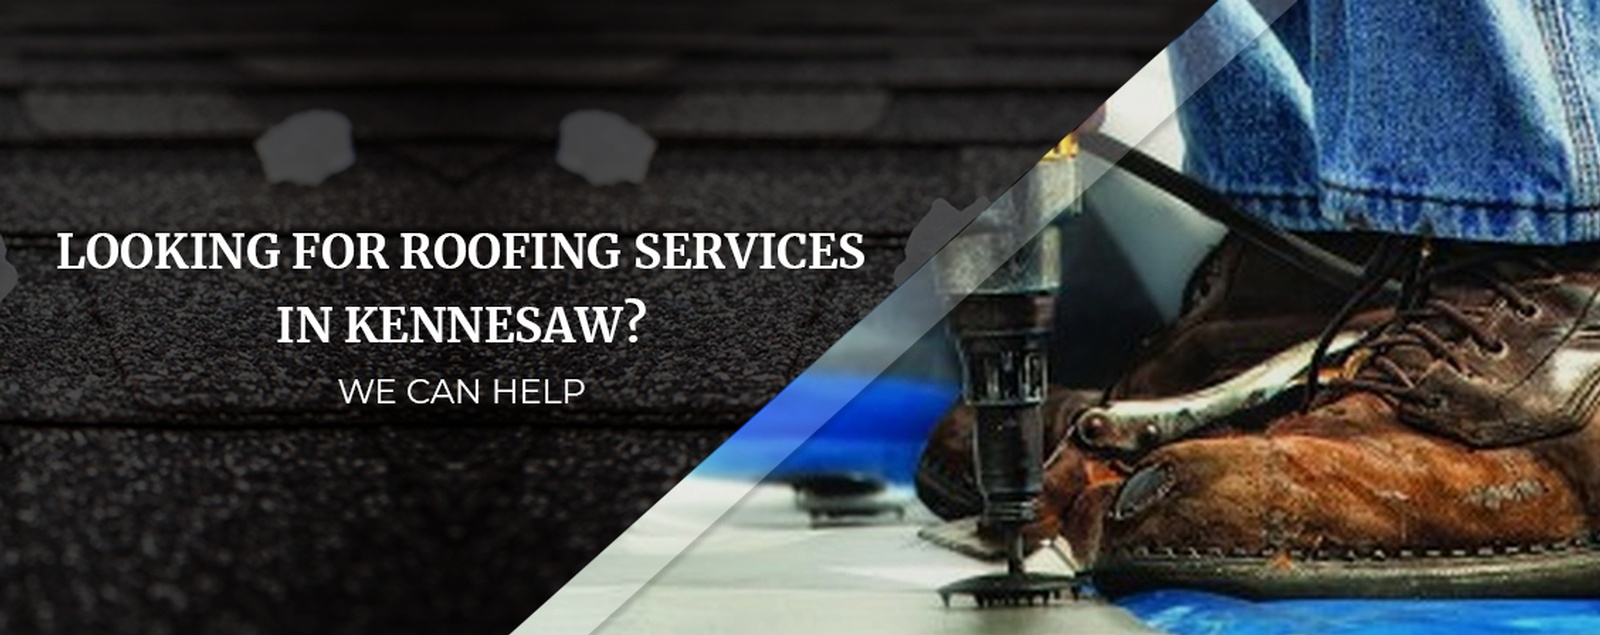  Looking For Roofing Services In Kennesaw We Can Help